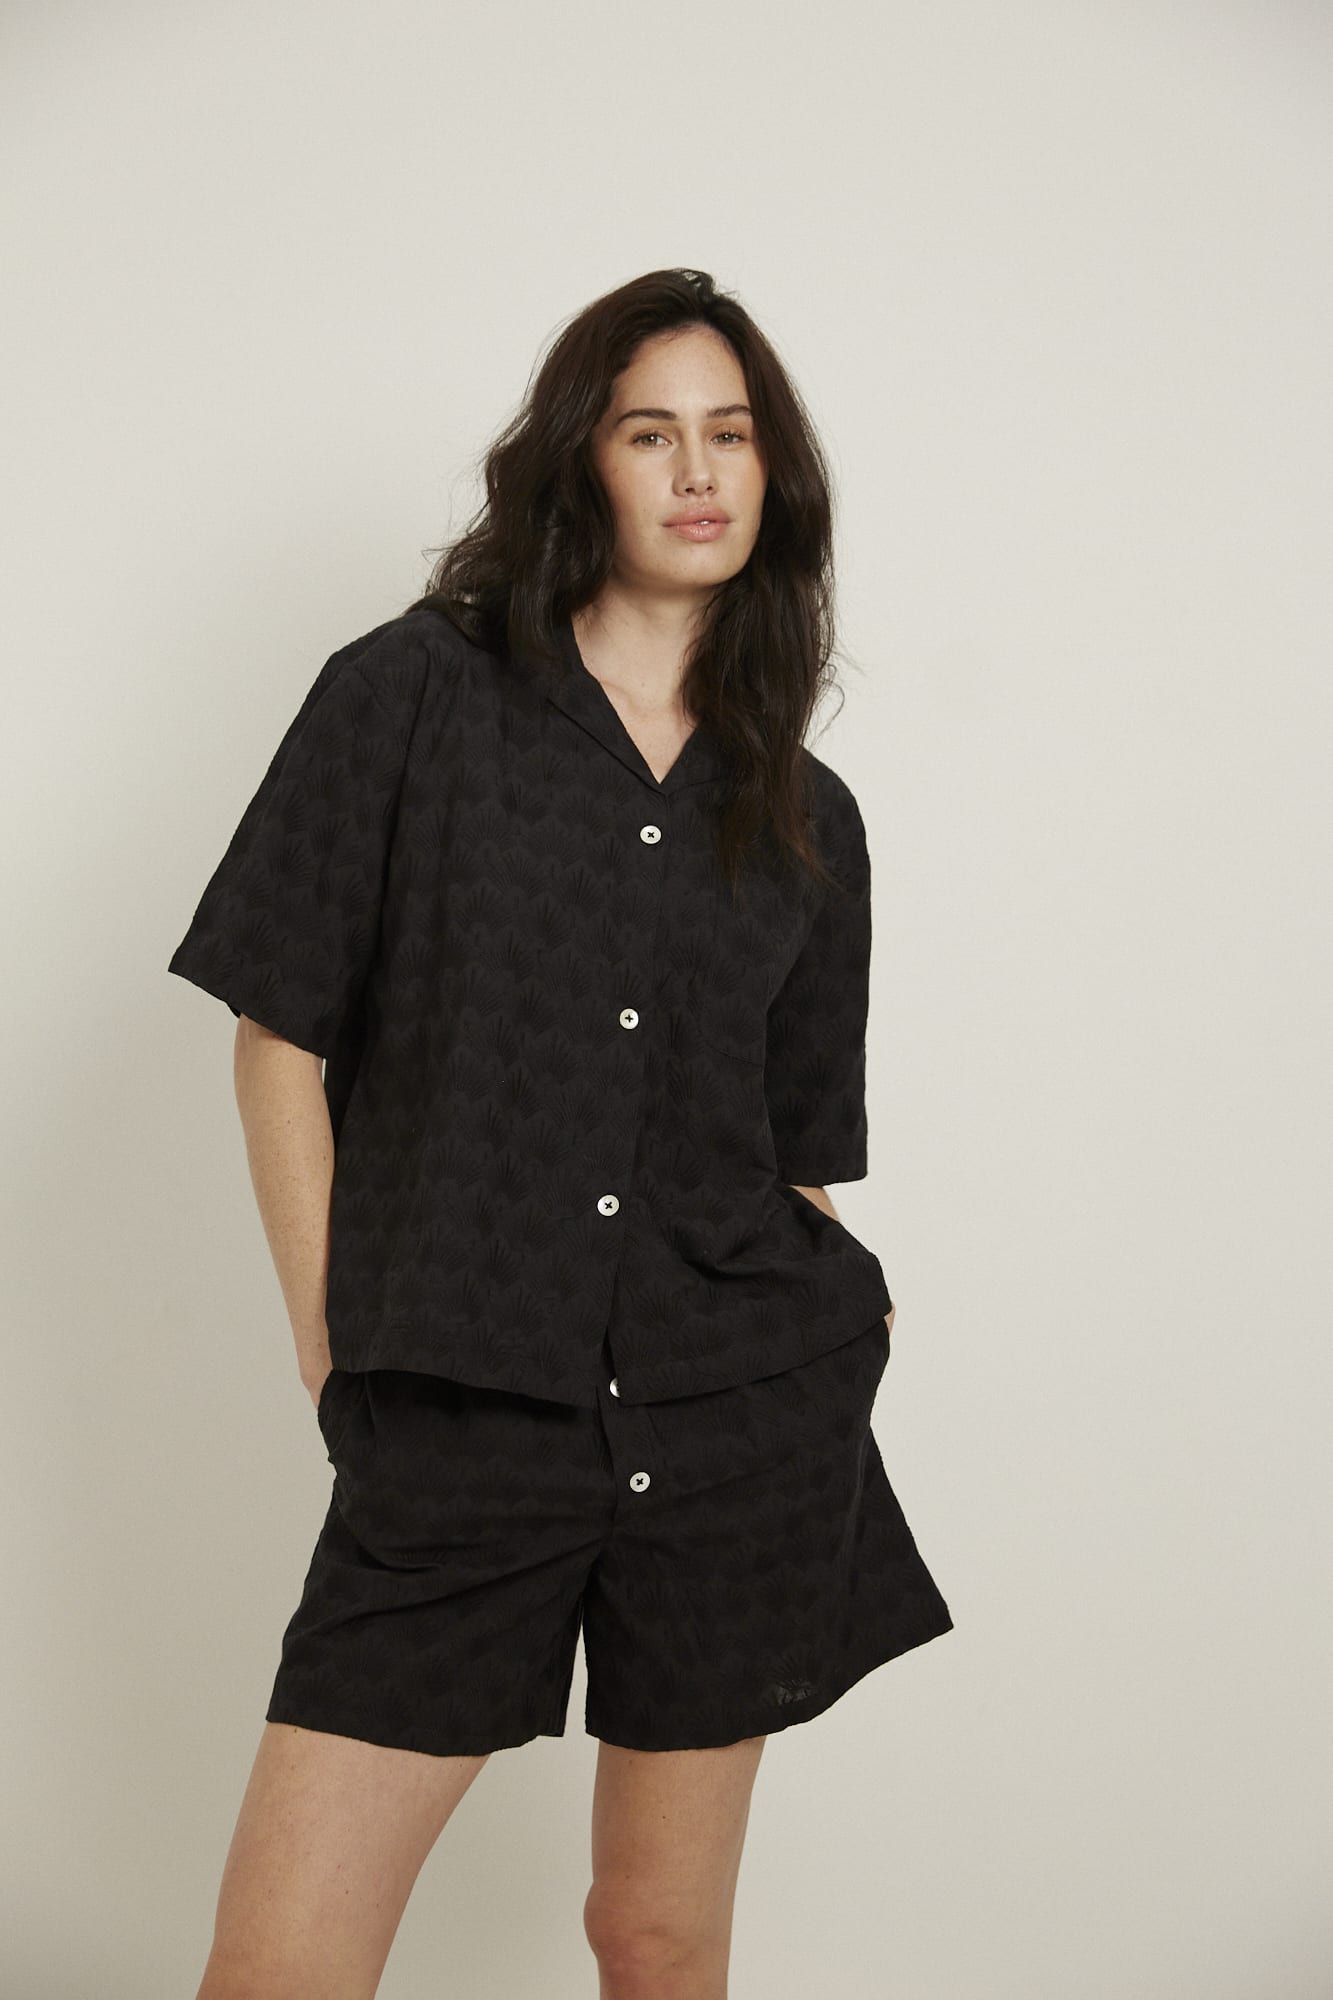 Women’s pyjama set including a short sleeve shirt and shorts. Made from 100% organic cotton, in black colour featuring delicate all over embroidery. The shirt has shell buttons, a front pocket and a back pleat with locker loop detail.  The shorts feature natural shell buttons and an elasticated waistband for comfort.